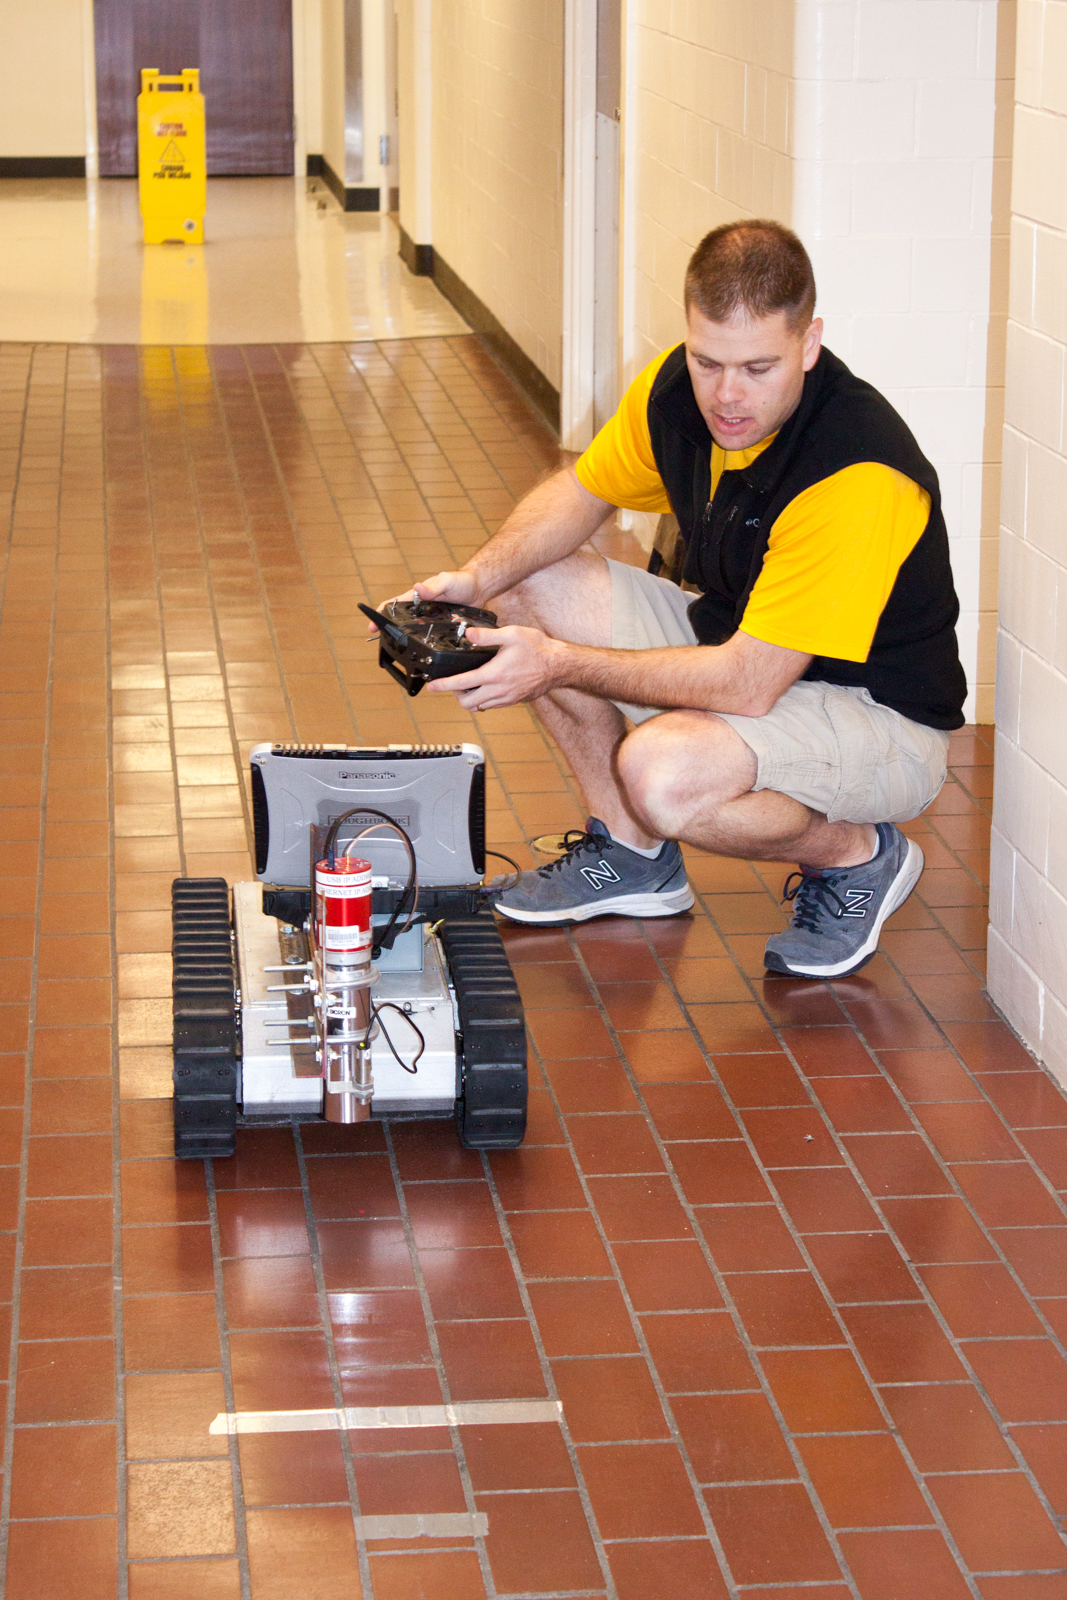 J.T. Falkner adjusts detector mounted on robot for small-scale field test.